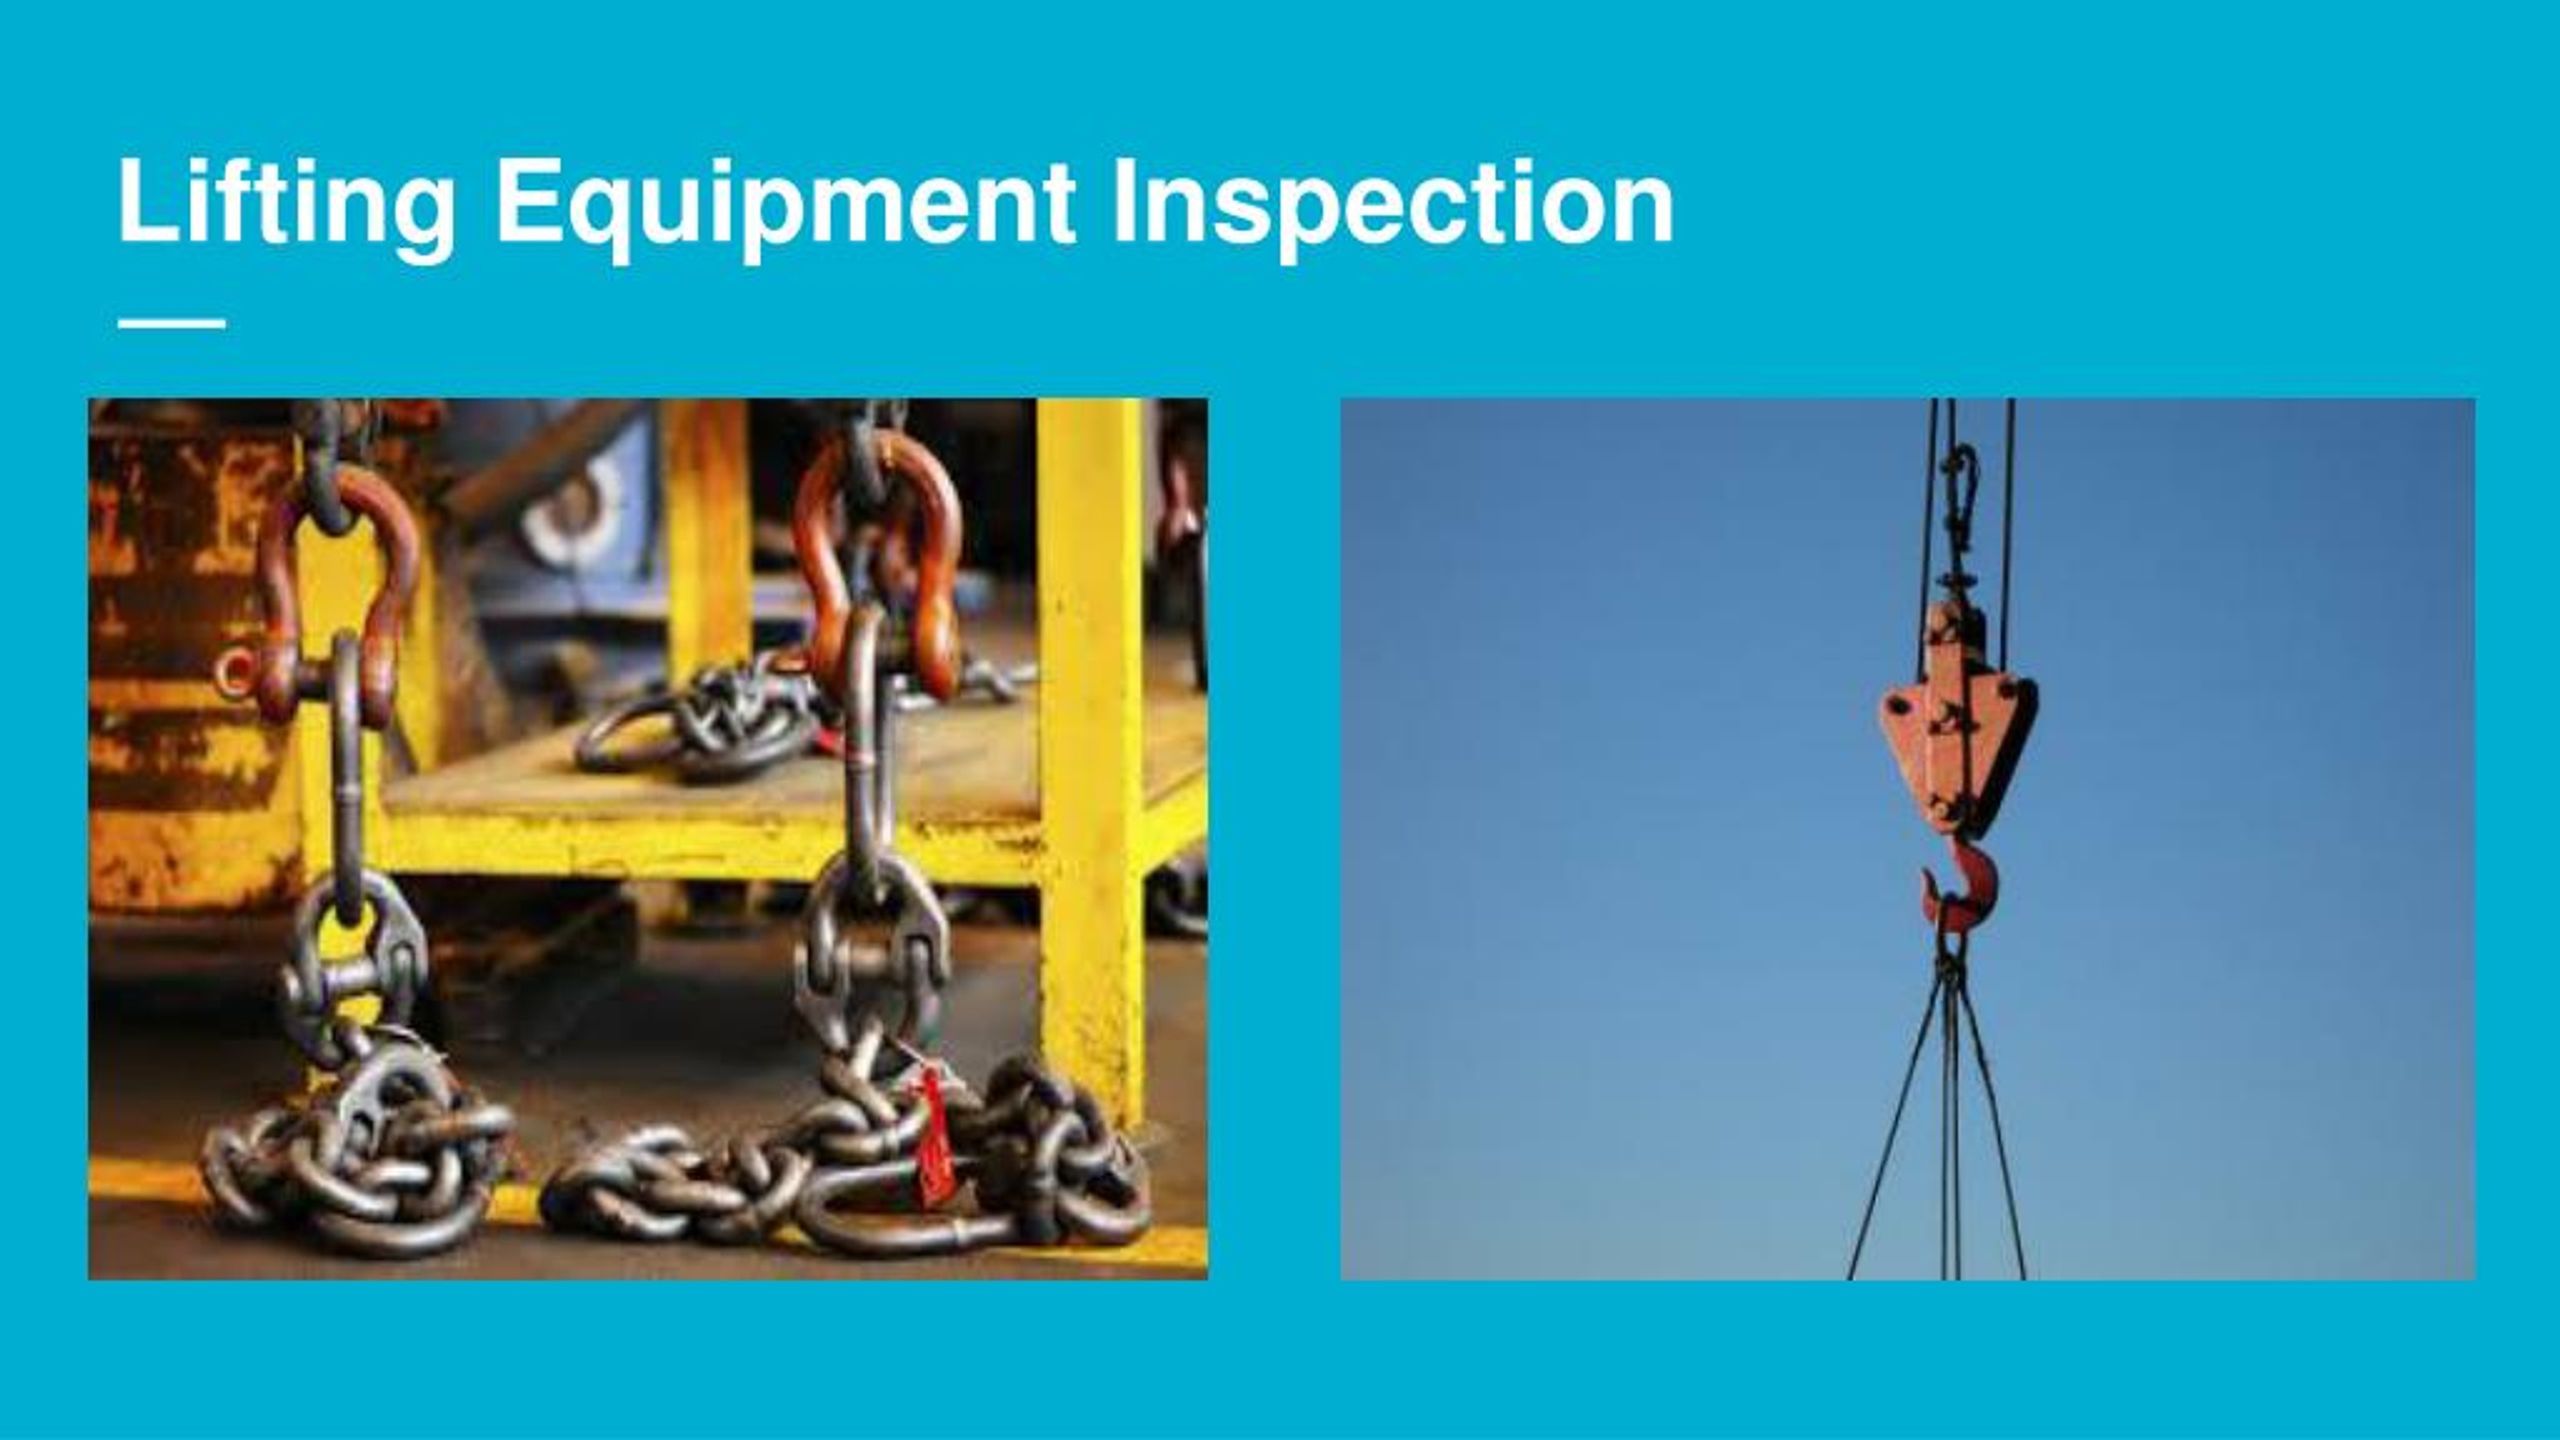 Ppt Information About Lifting Equipment Inspection Services